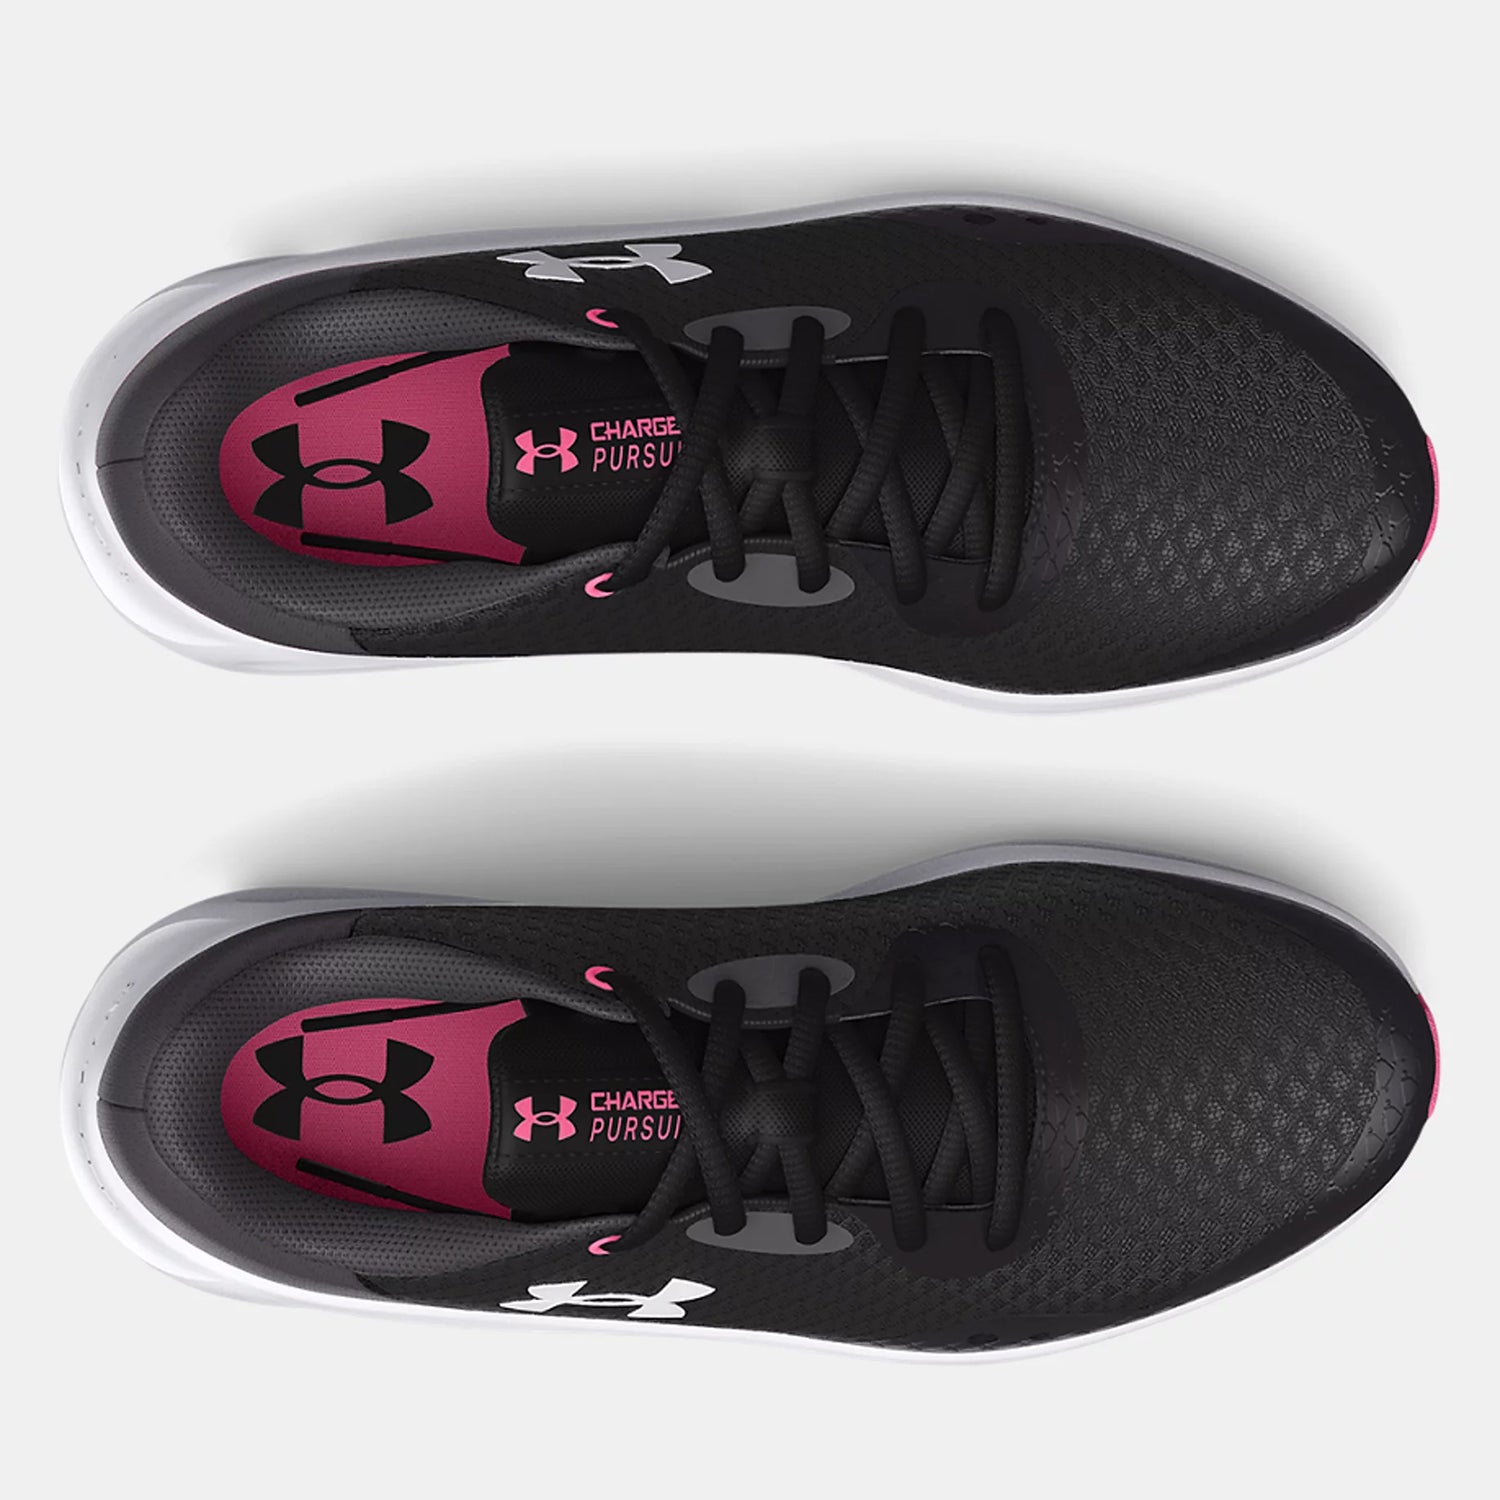 Under Armour Charged Pursuit 2 Mens Mens Running Shoes Black, £25.00